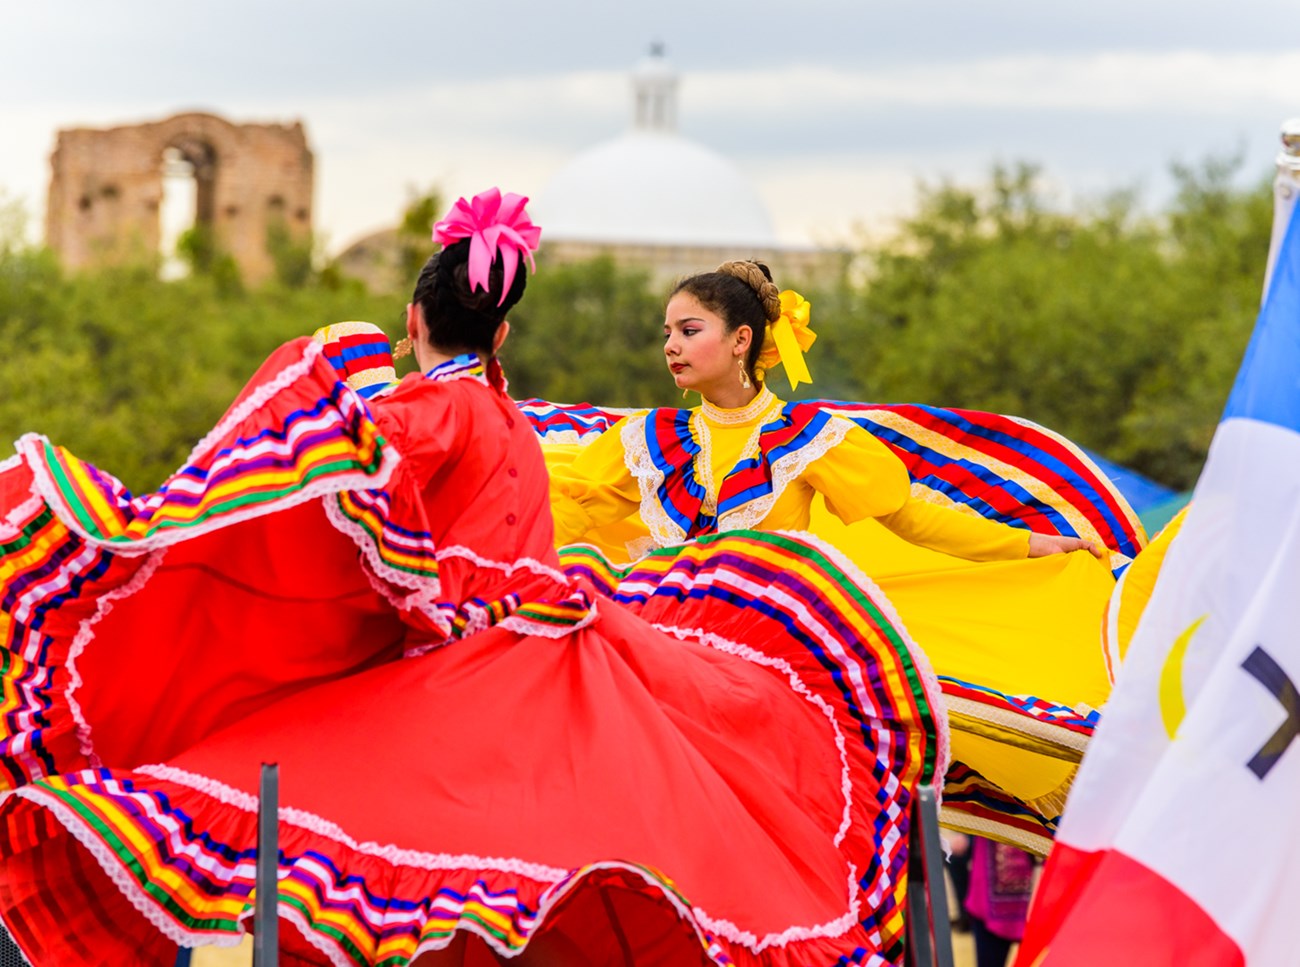 Dancers in colorful outfits dancing with church in background.